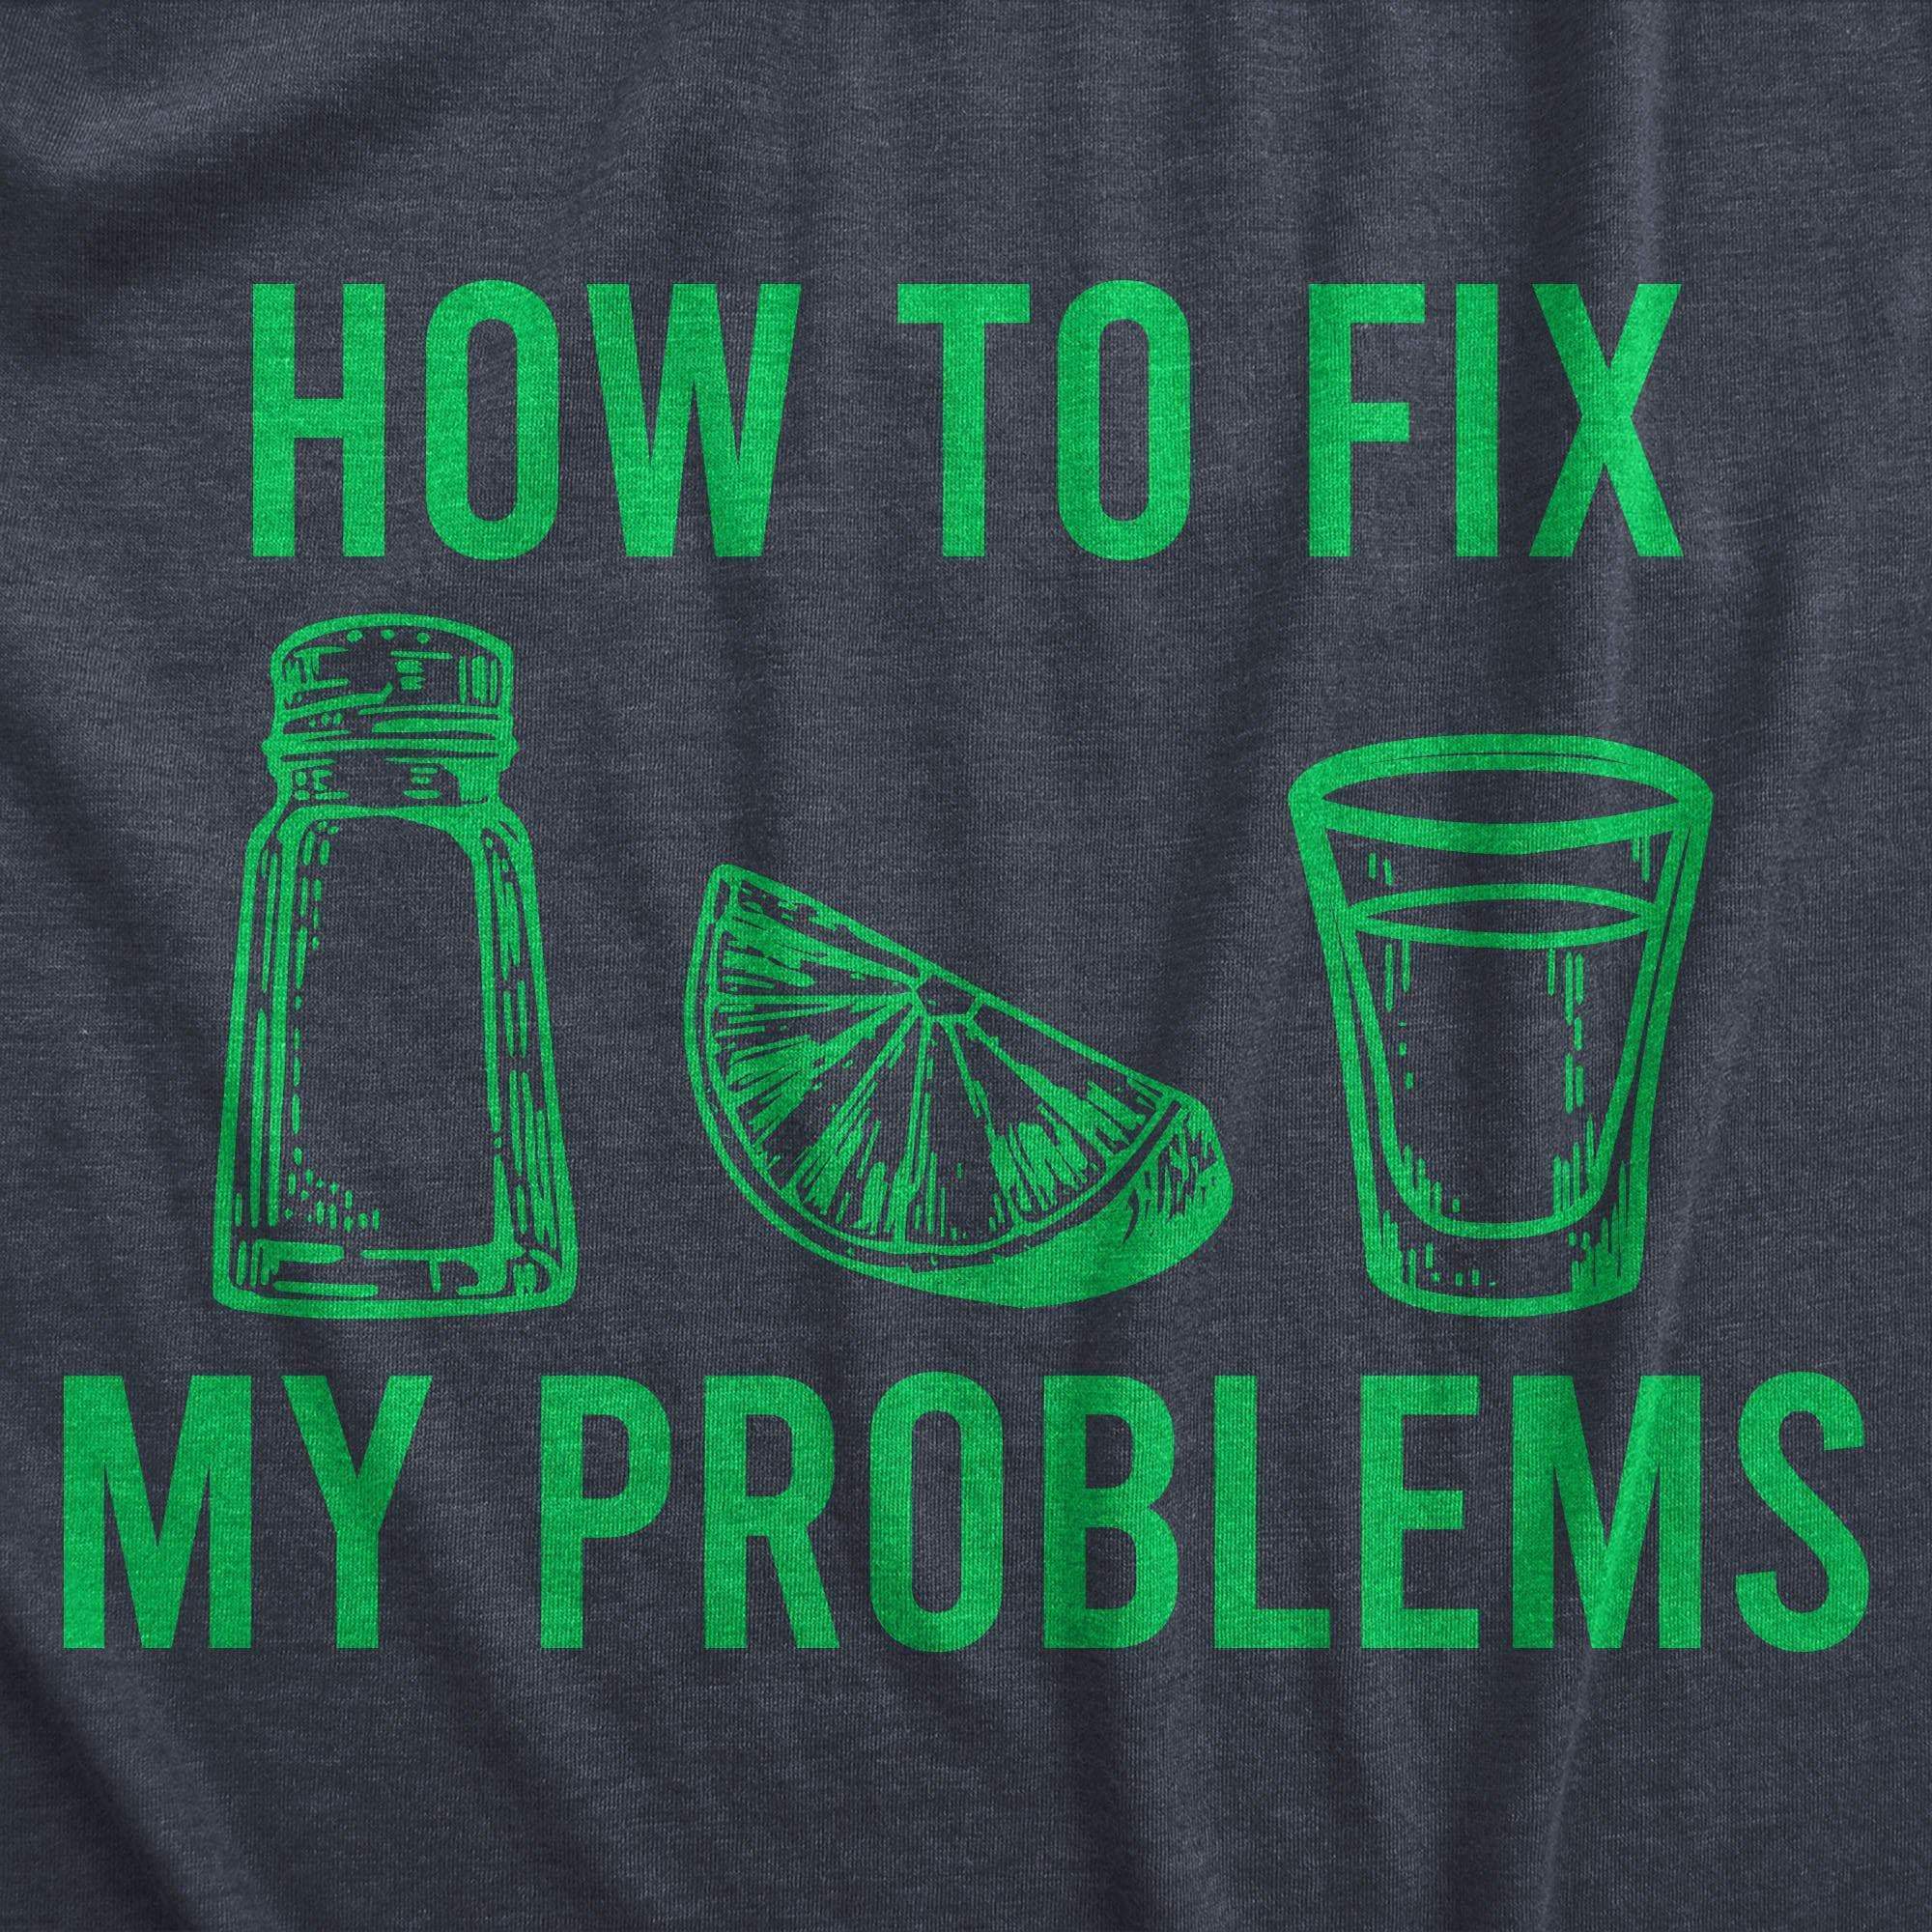 How To Fix My Problems Men's Tshirt - Crazy Dog T-Shirts